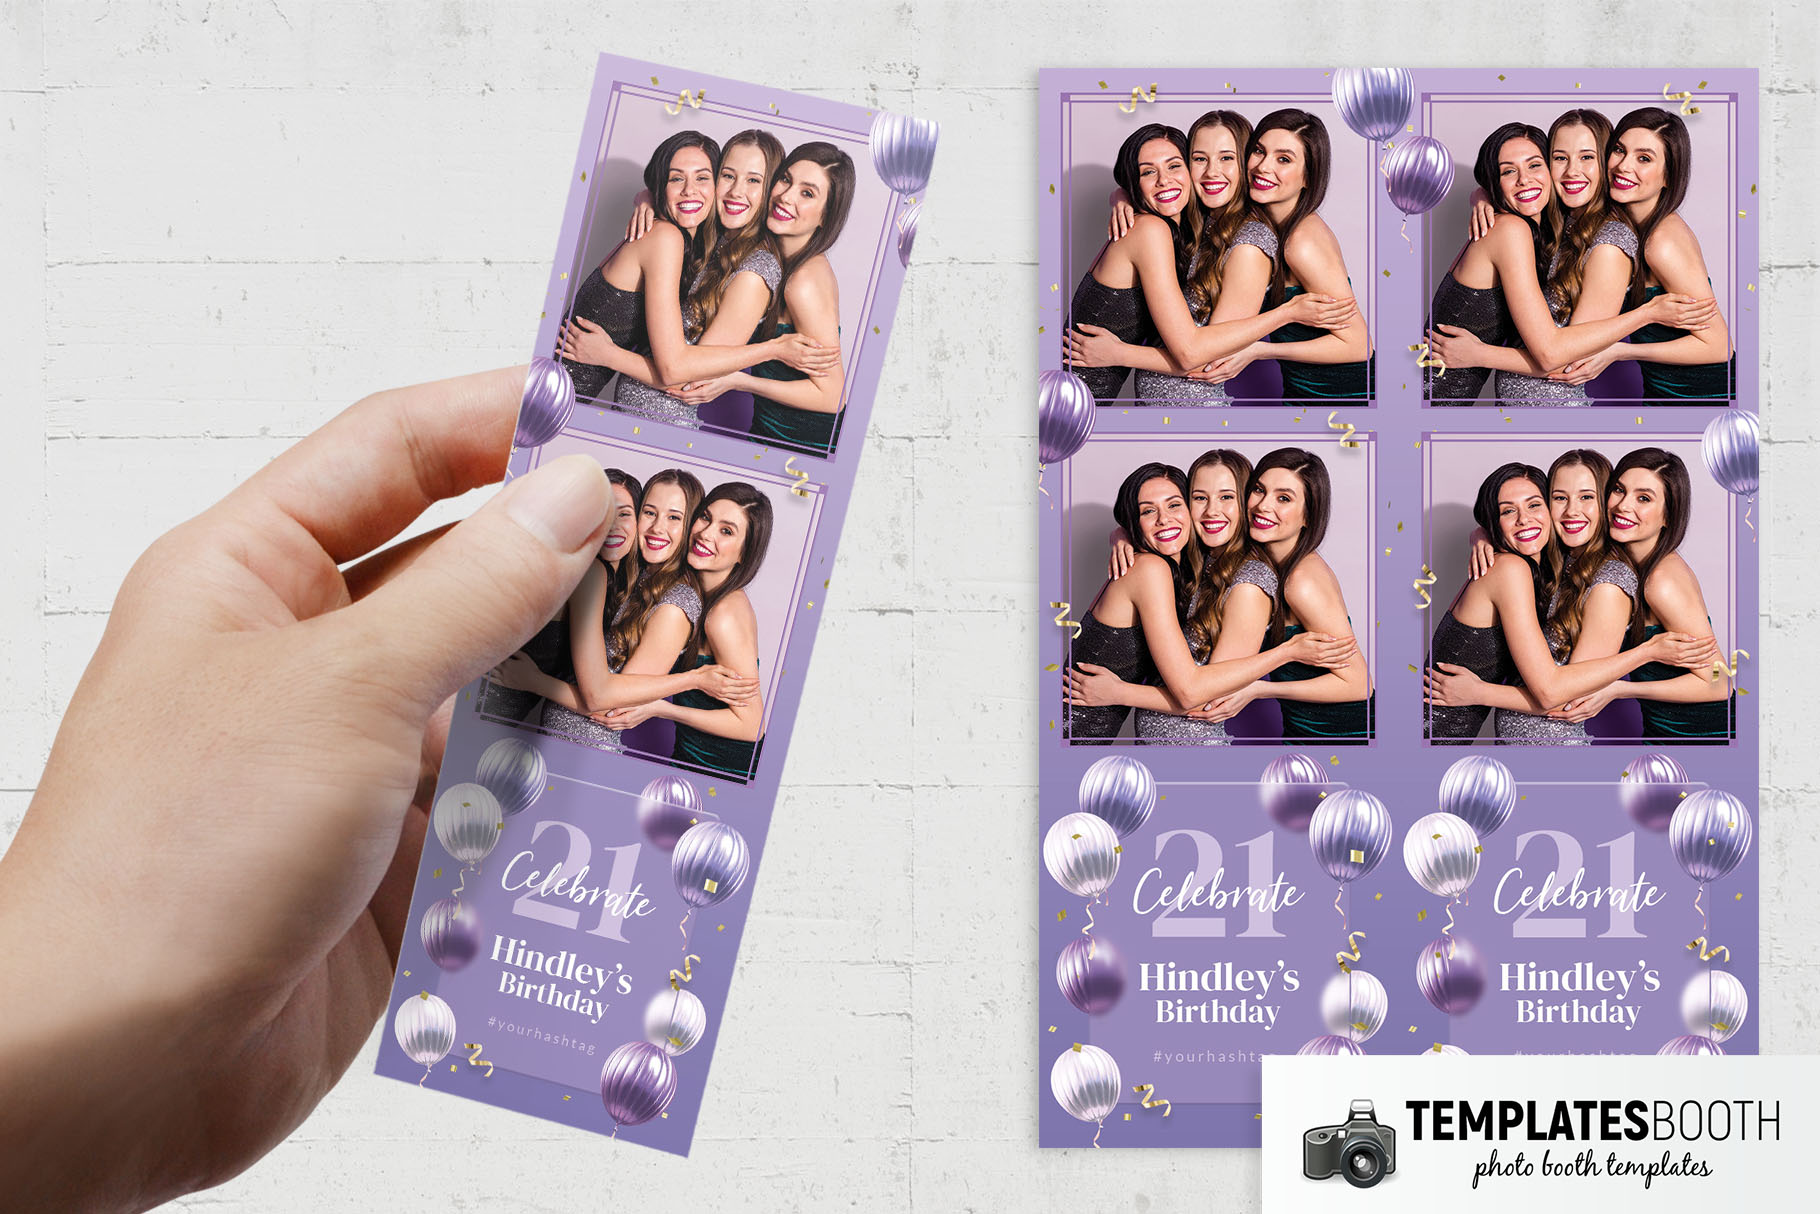 21st Birthday Photo Booth Template - TemplatesBooth